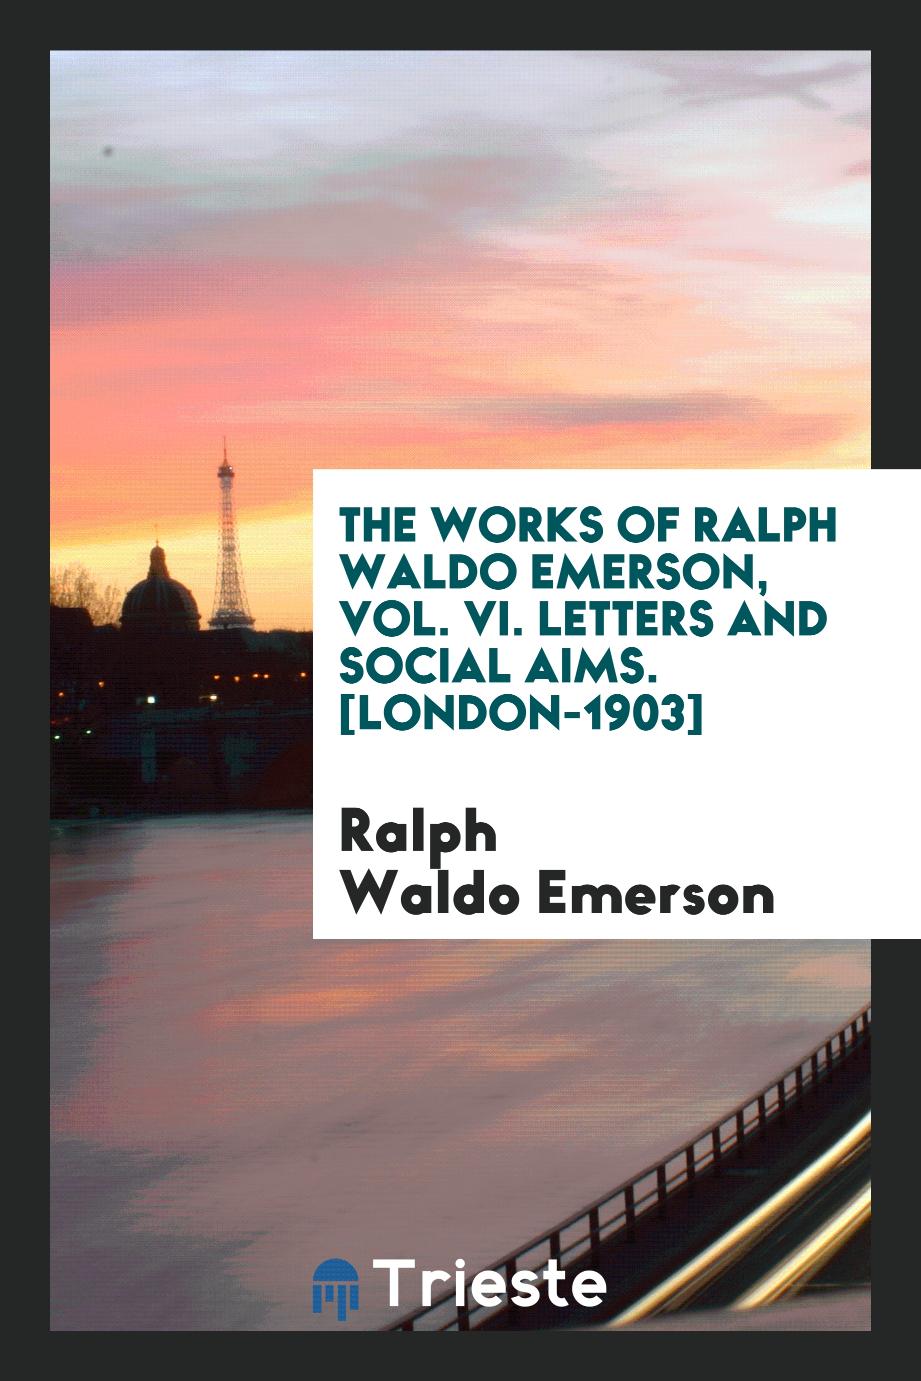 The Works of Ralph Waldo Emerson, Vol. VI. Letters and Social Aims. [London-1903]